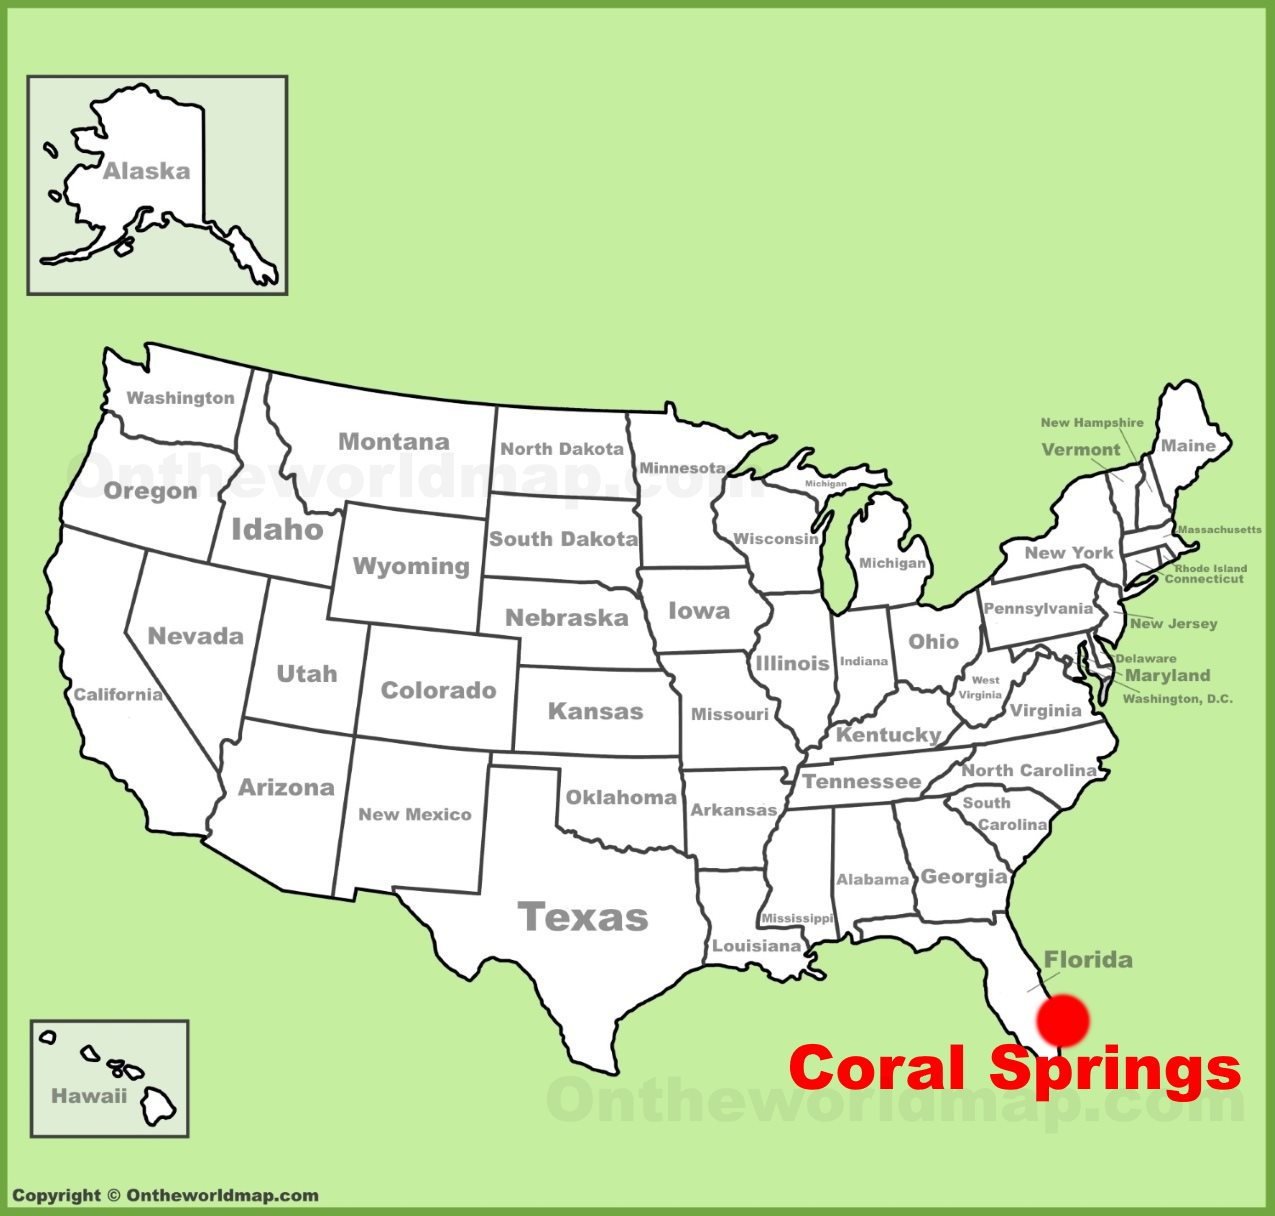 Coral Springs Location On The U.s. Map - Map Of Florida Showing Coral Springs